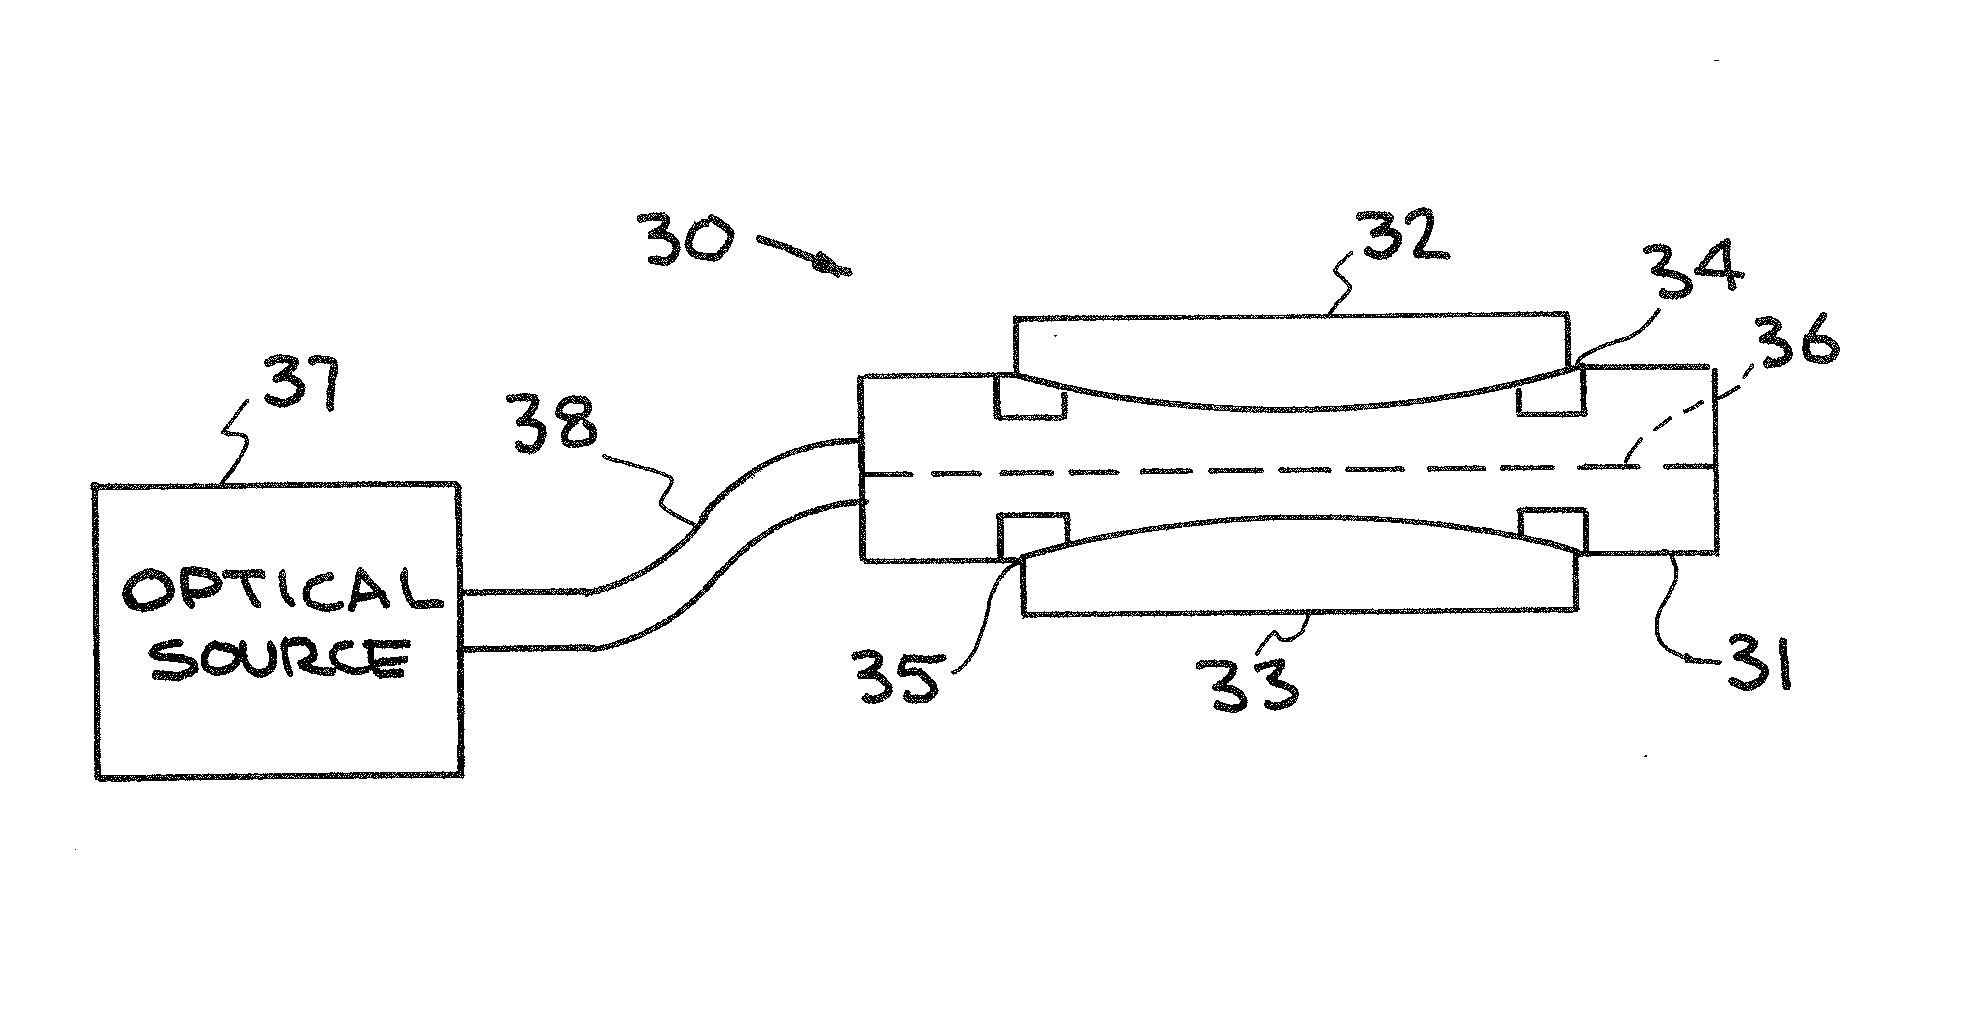 Optically-initiated silicon carbide high voltage switch with contoured-profile electrode interfaces